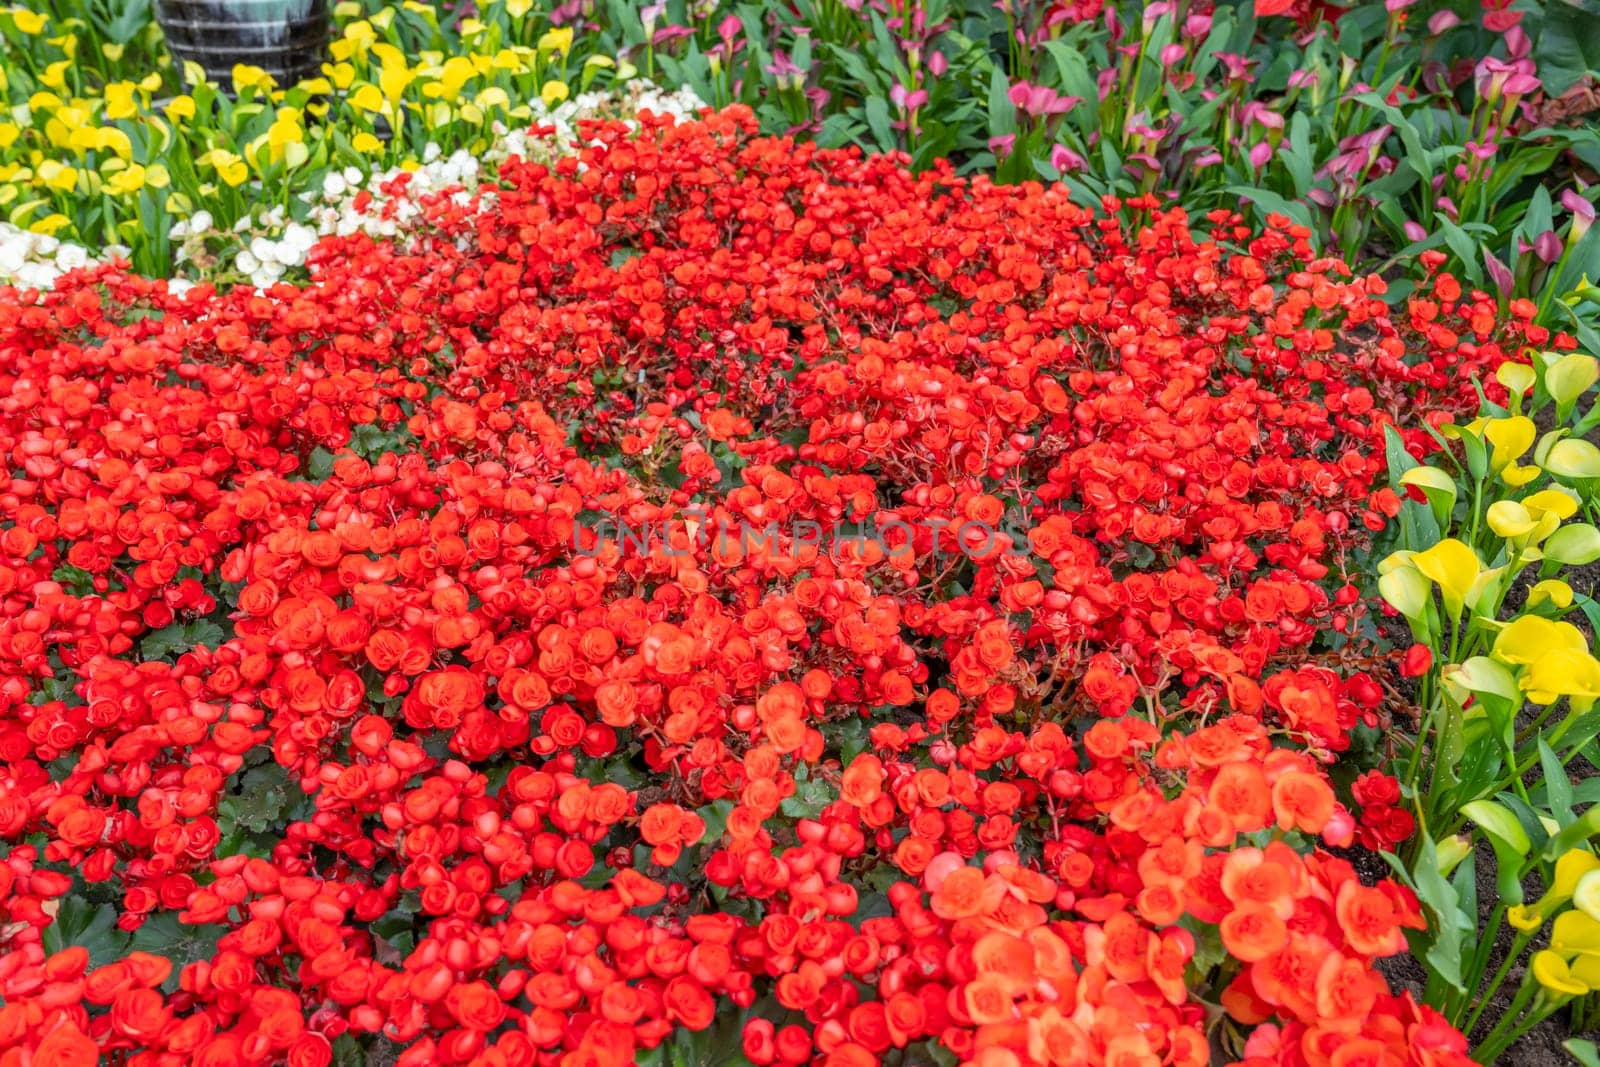 Begonias are one of our most popular plants, Typically used as houseplants and in shaded summer beds.